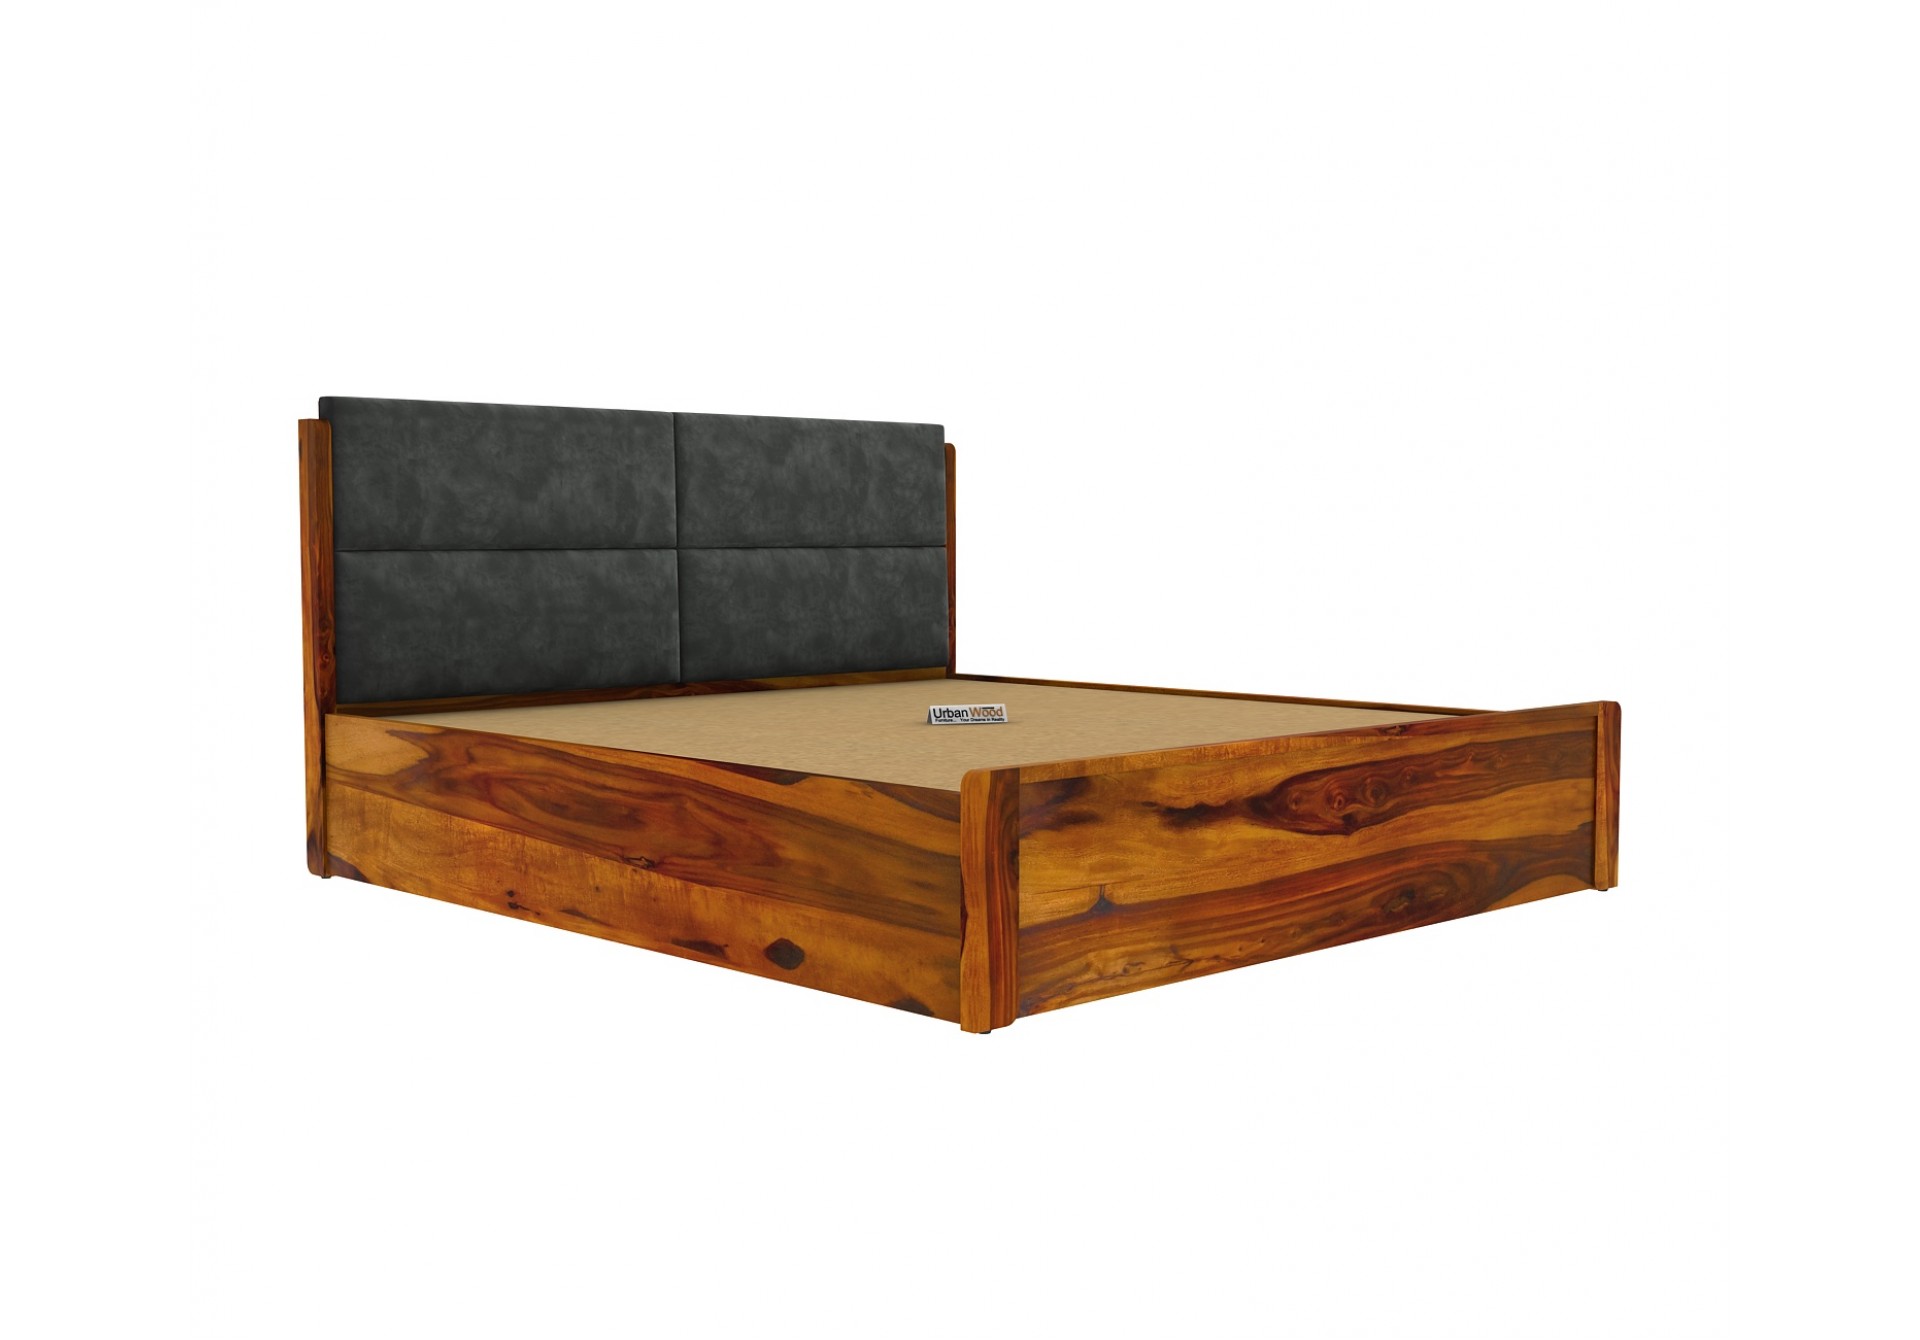 Luxe Urbanwood Exclusive Hydraulic Storage Bed ( Queen Size, Honey Finish )